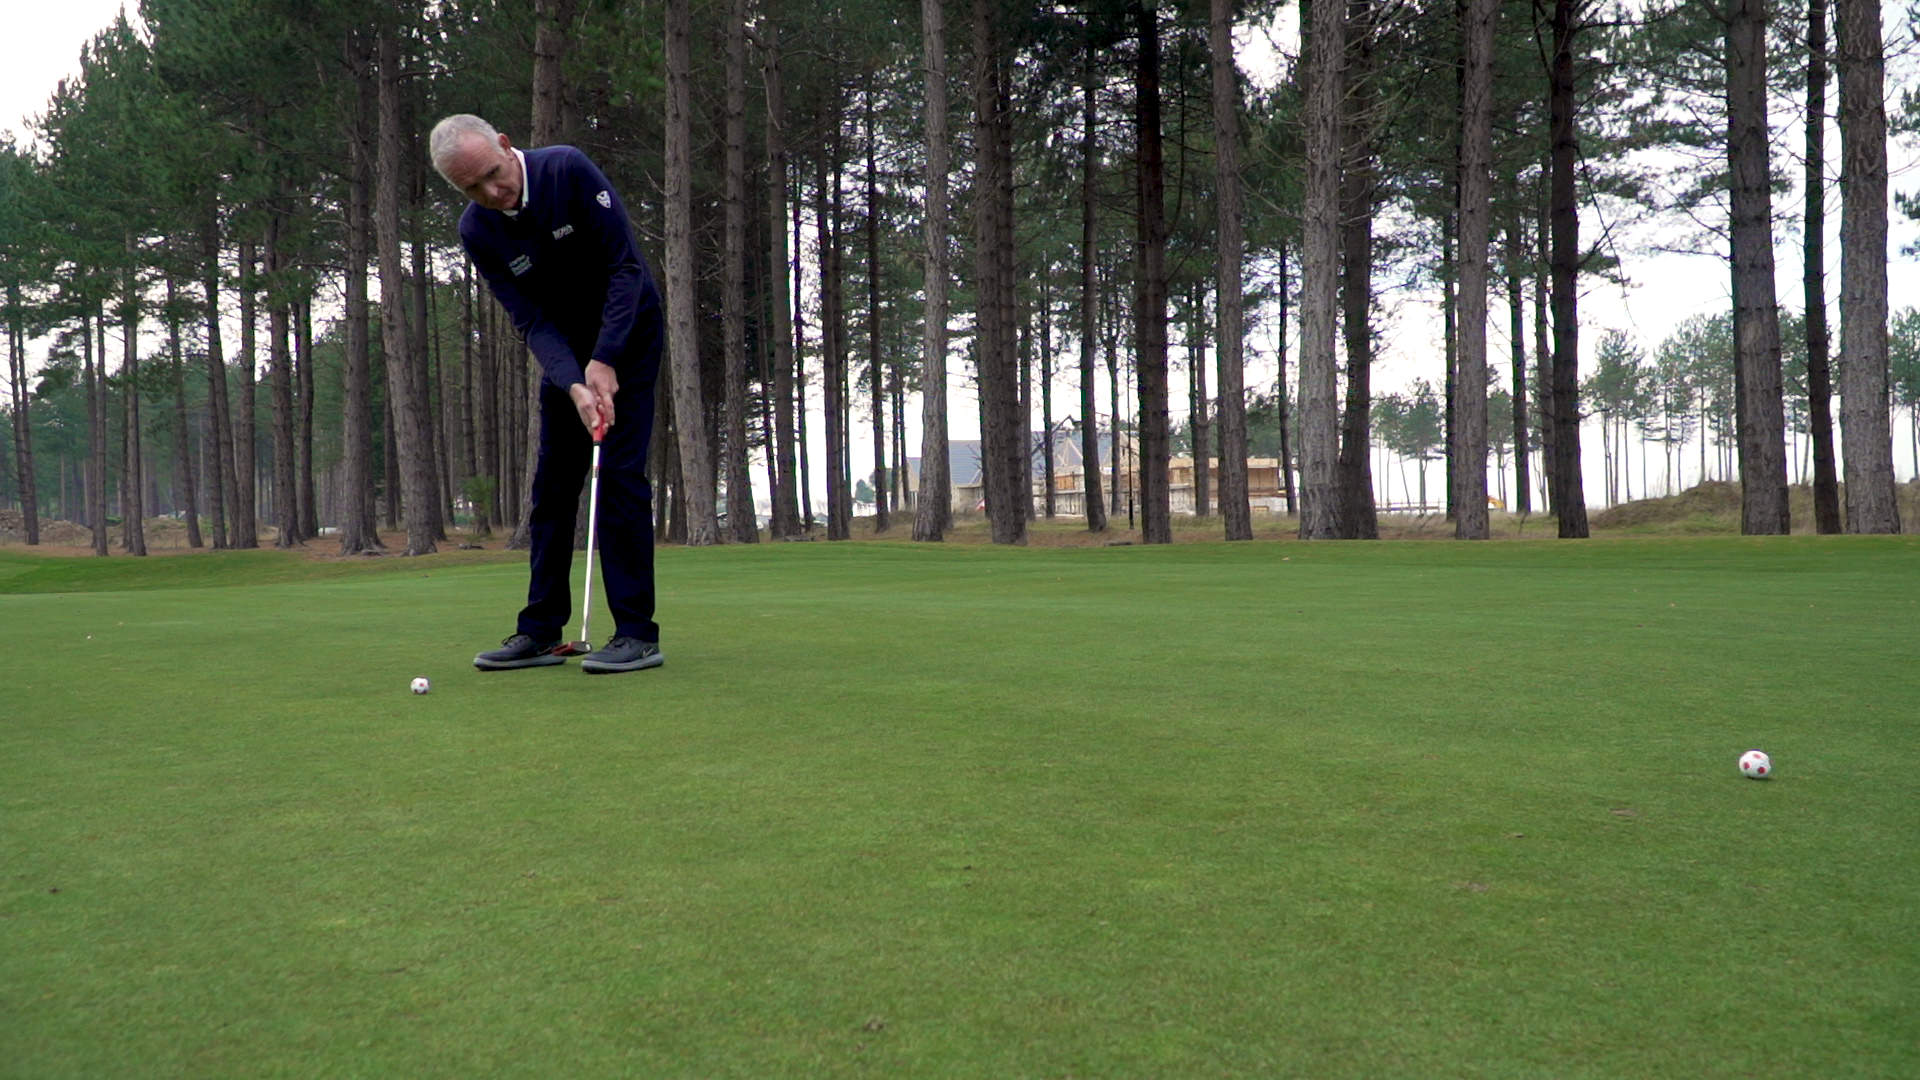 Try this two-ball drill to improve your putting